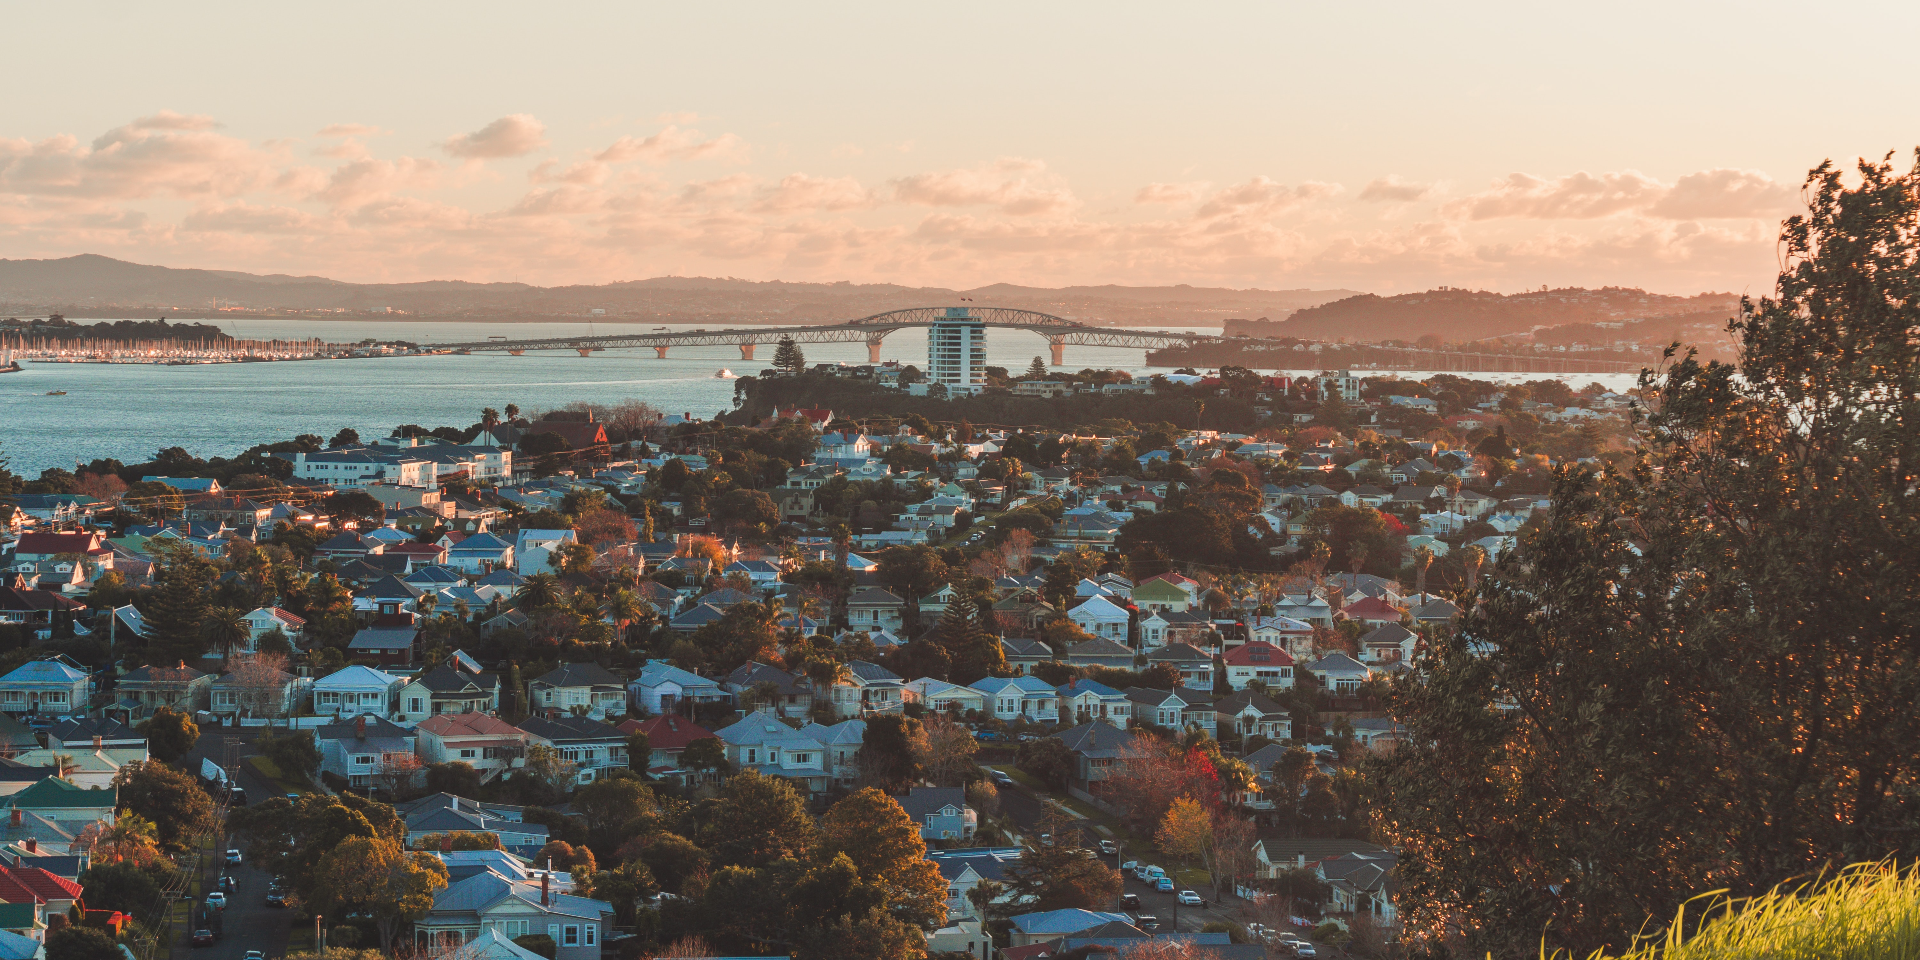 Auckland city suburbs, with the harbour bridge in the distance